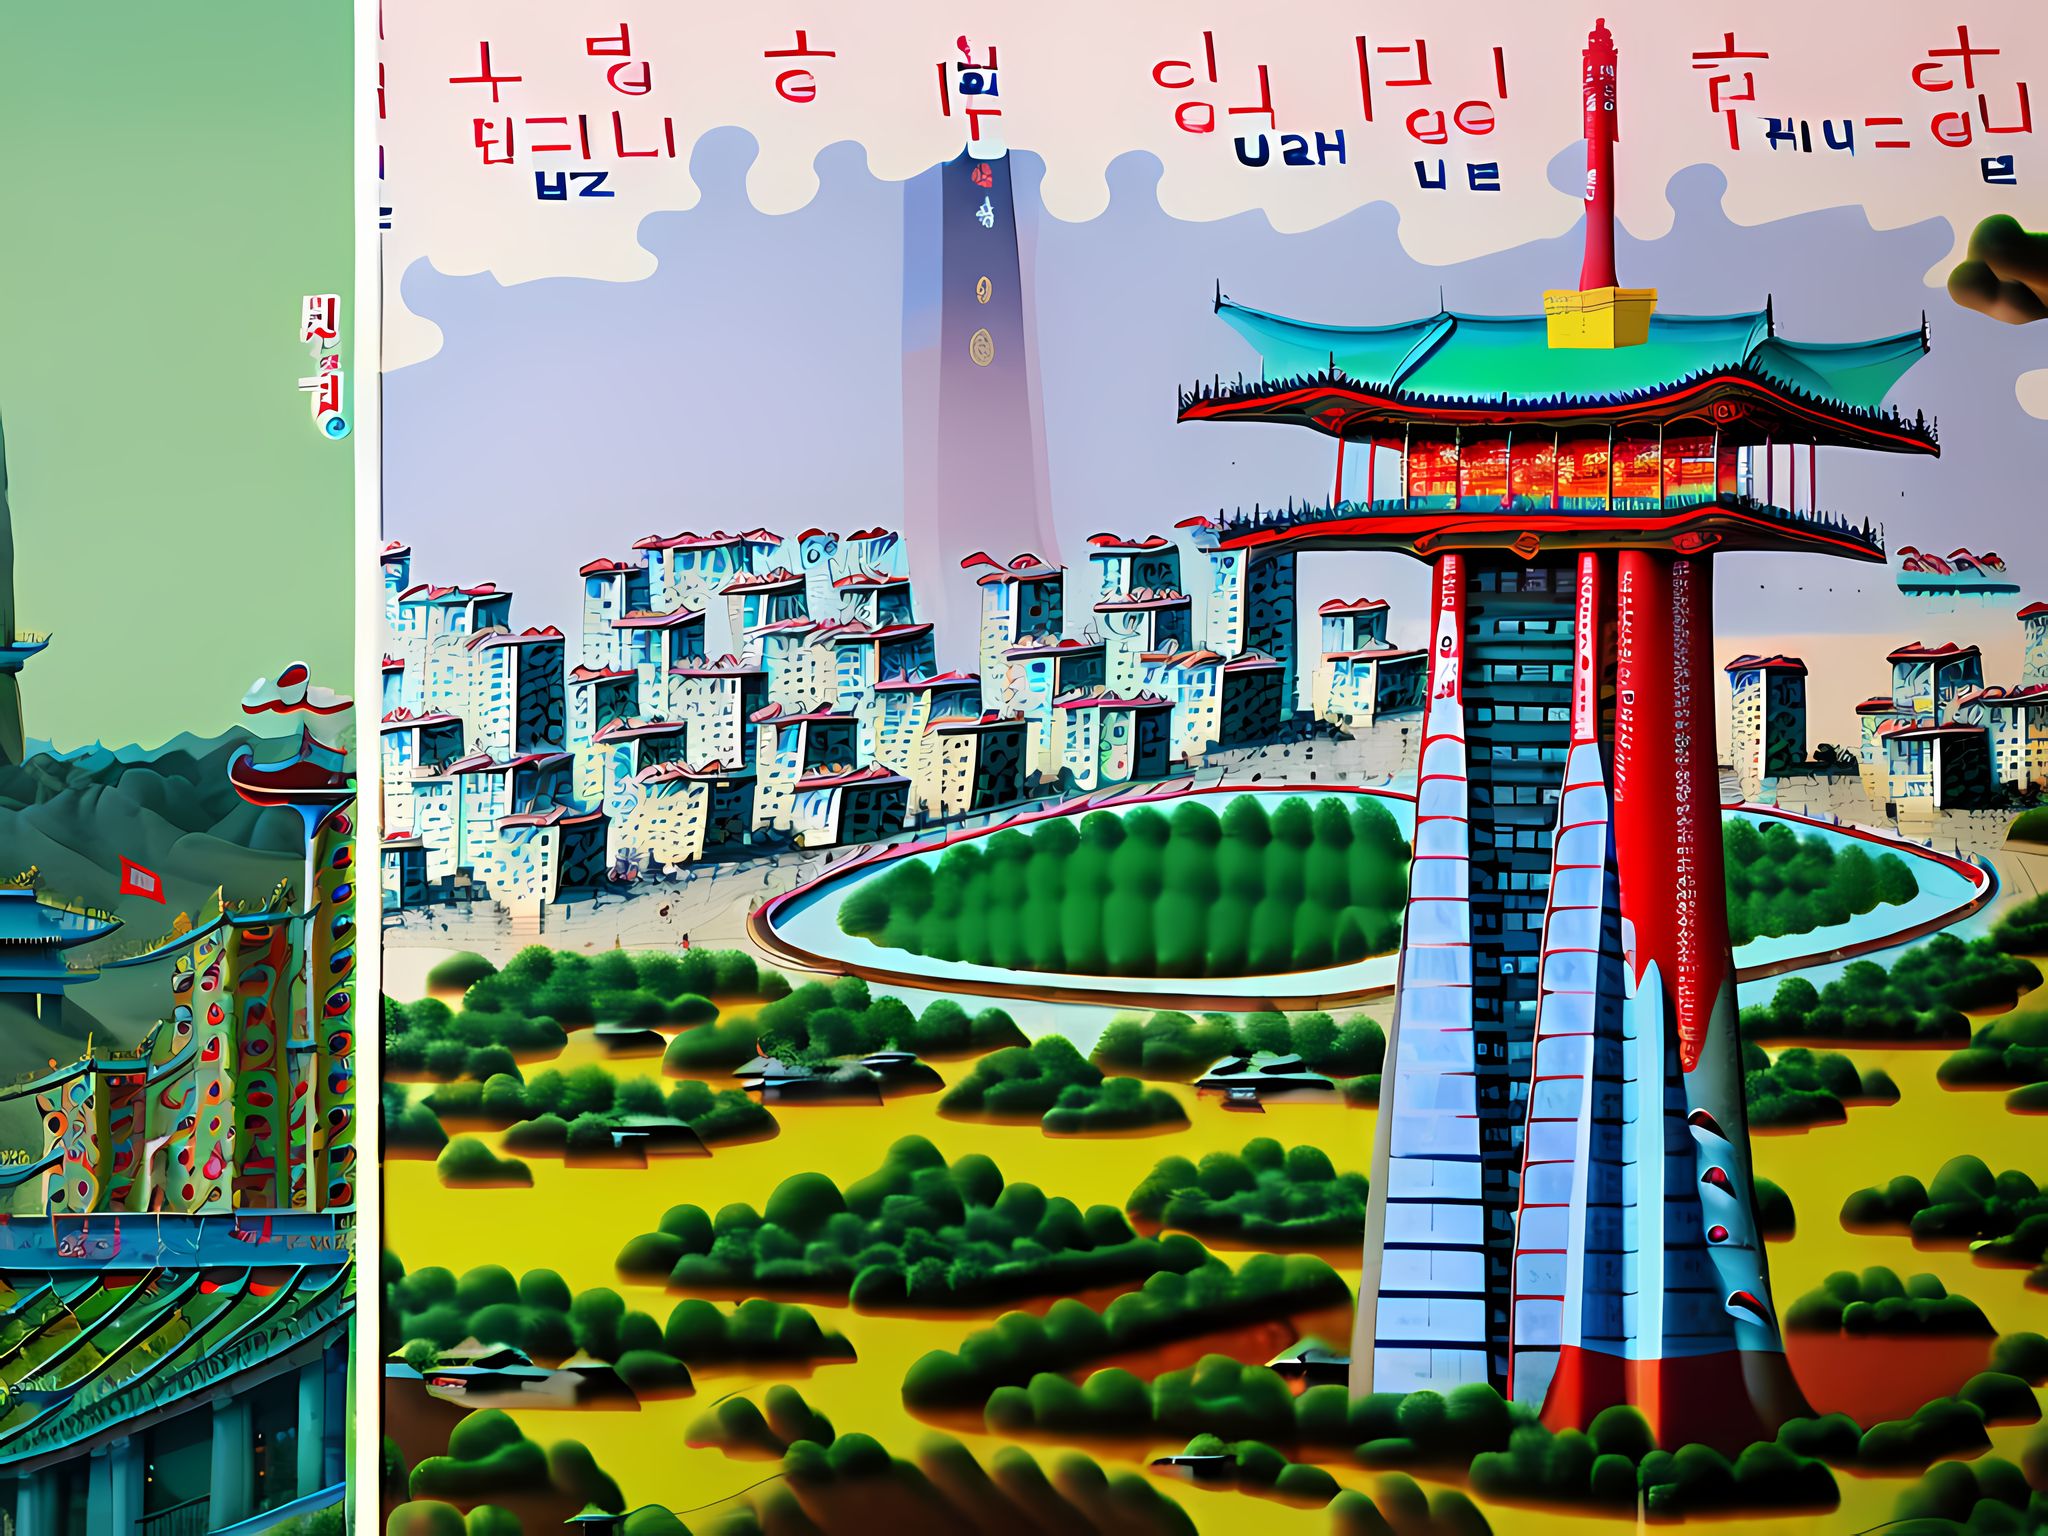 Melting-tower-in-Pyongyang-tower-in-the-center-of-frame-North-Korea-city-nature-Asian-Historic-k3xt